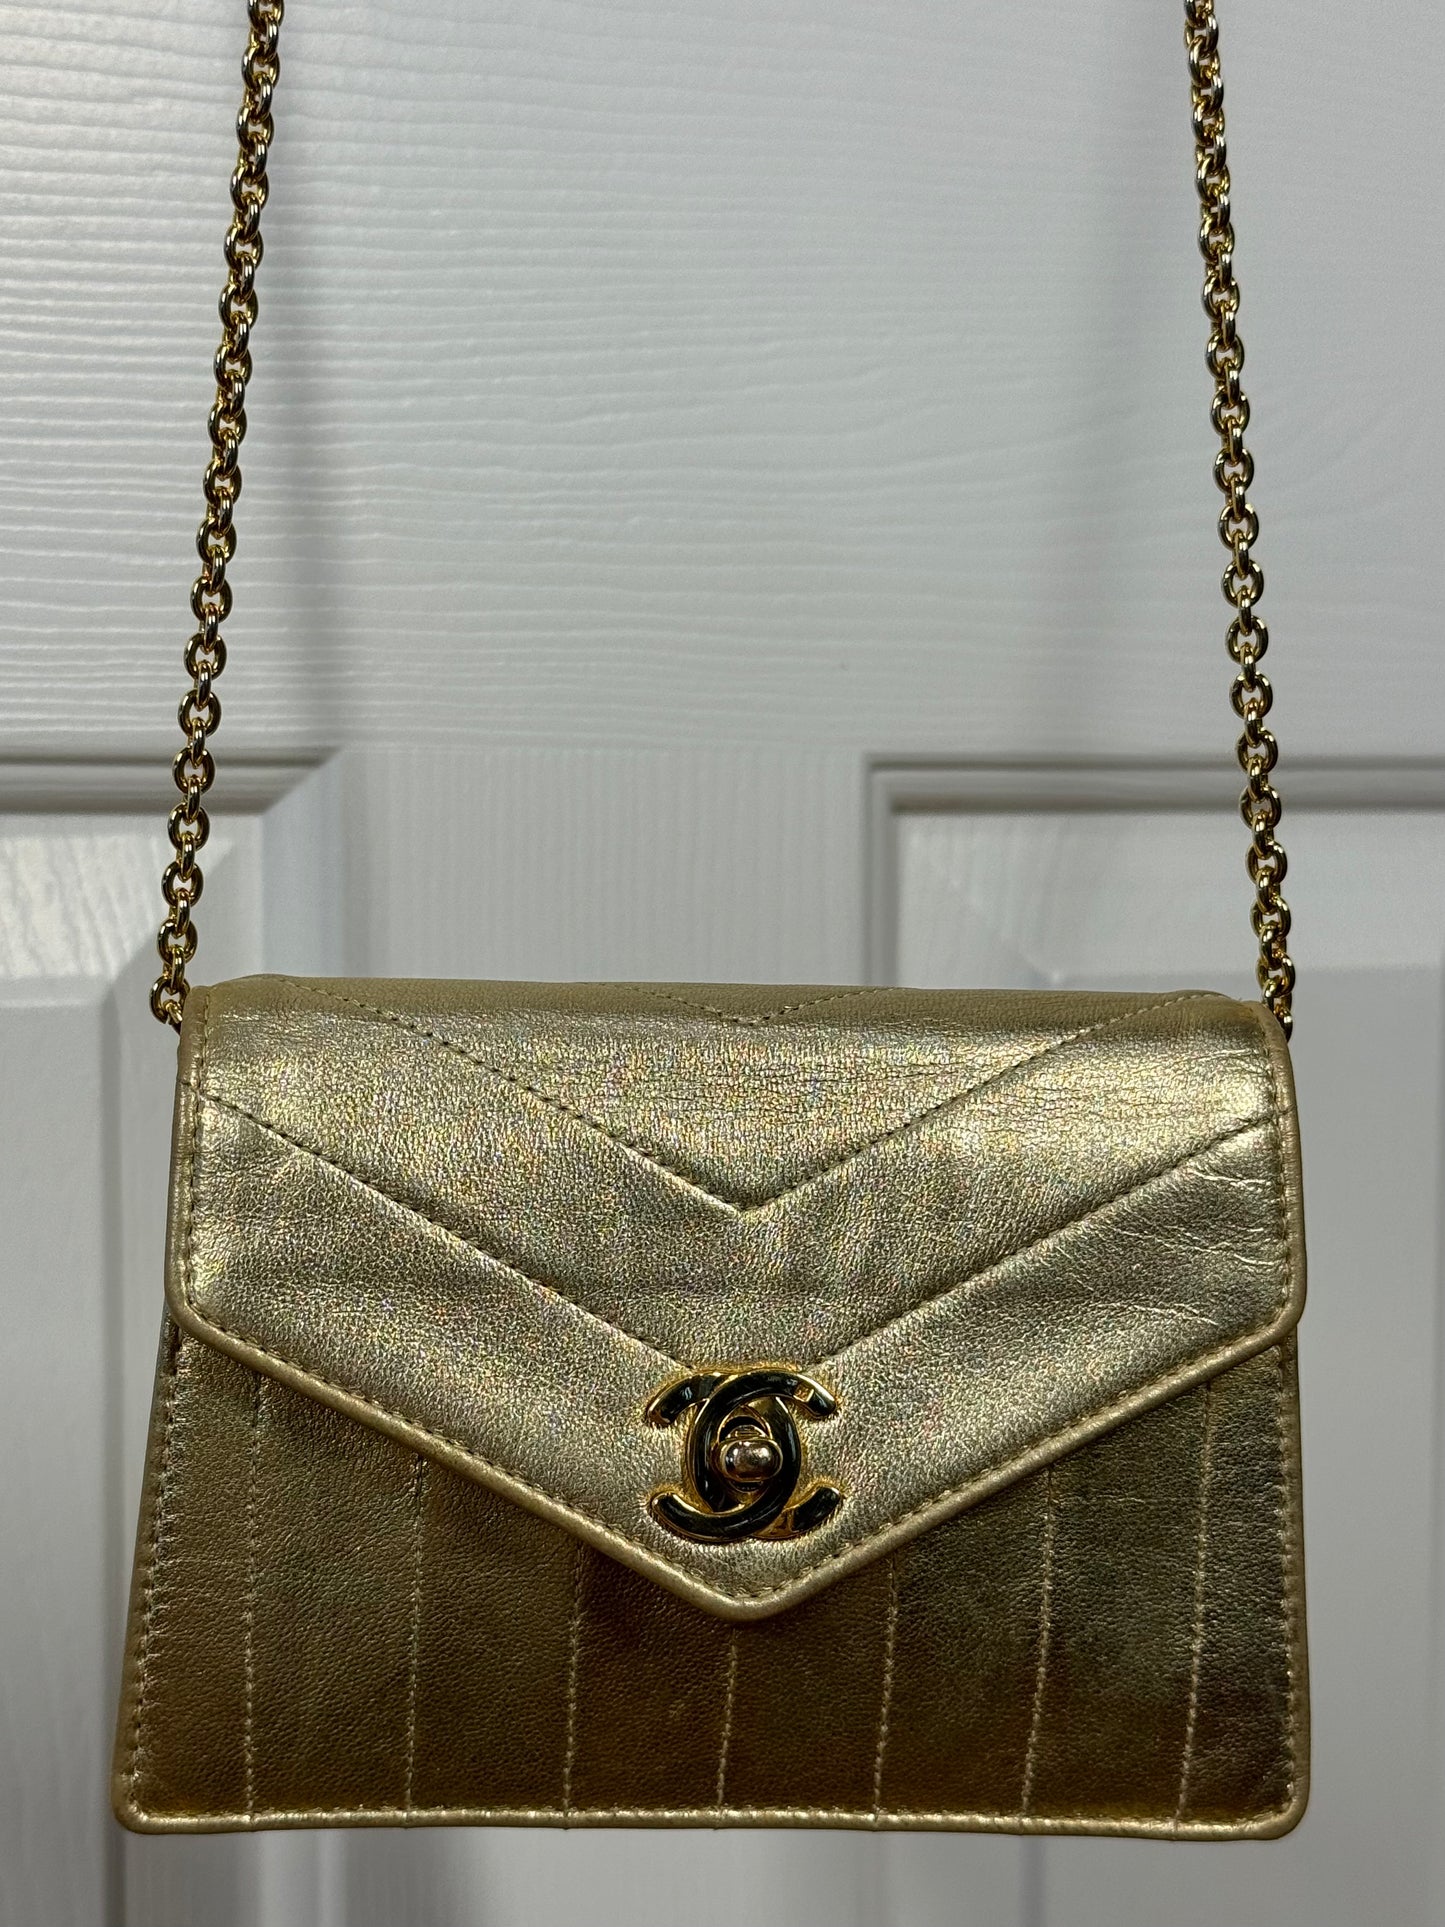 Chanel Vintage Early 80s Metallic Gold Lambskin Trapezoid Mini Flap Chain Bag w 24K Gold Plated Hardware